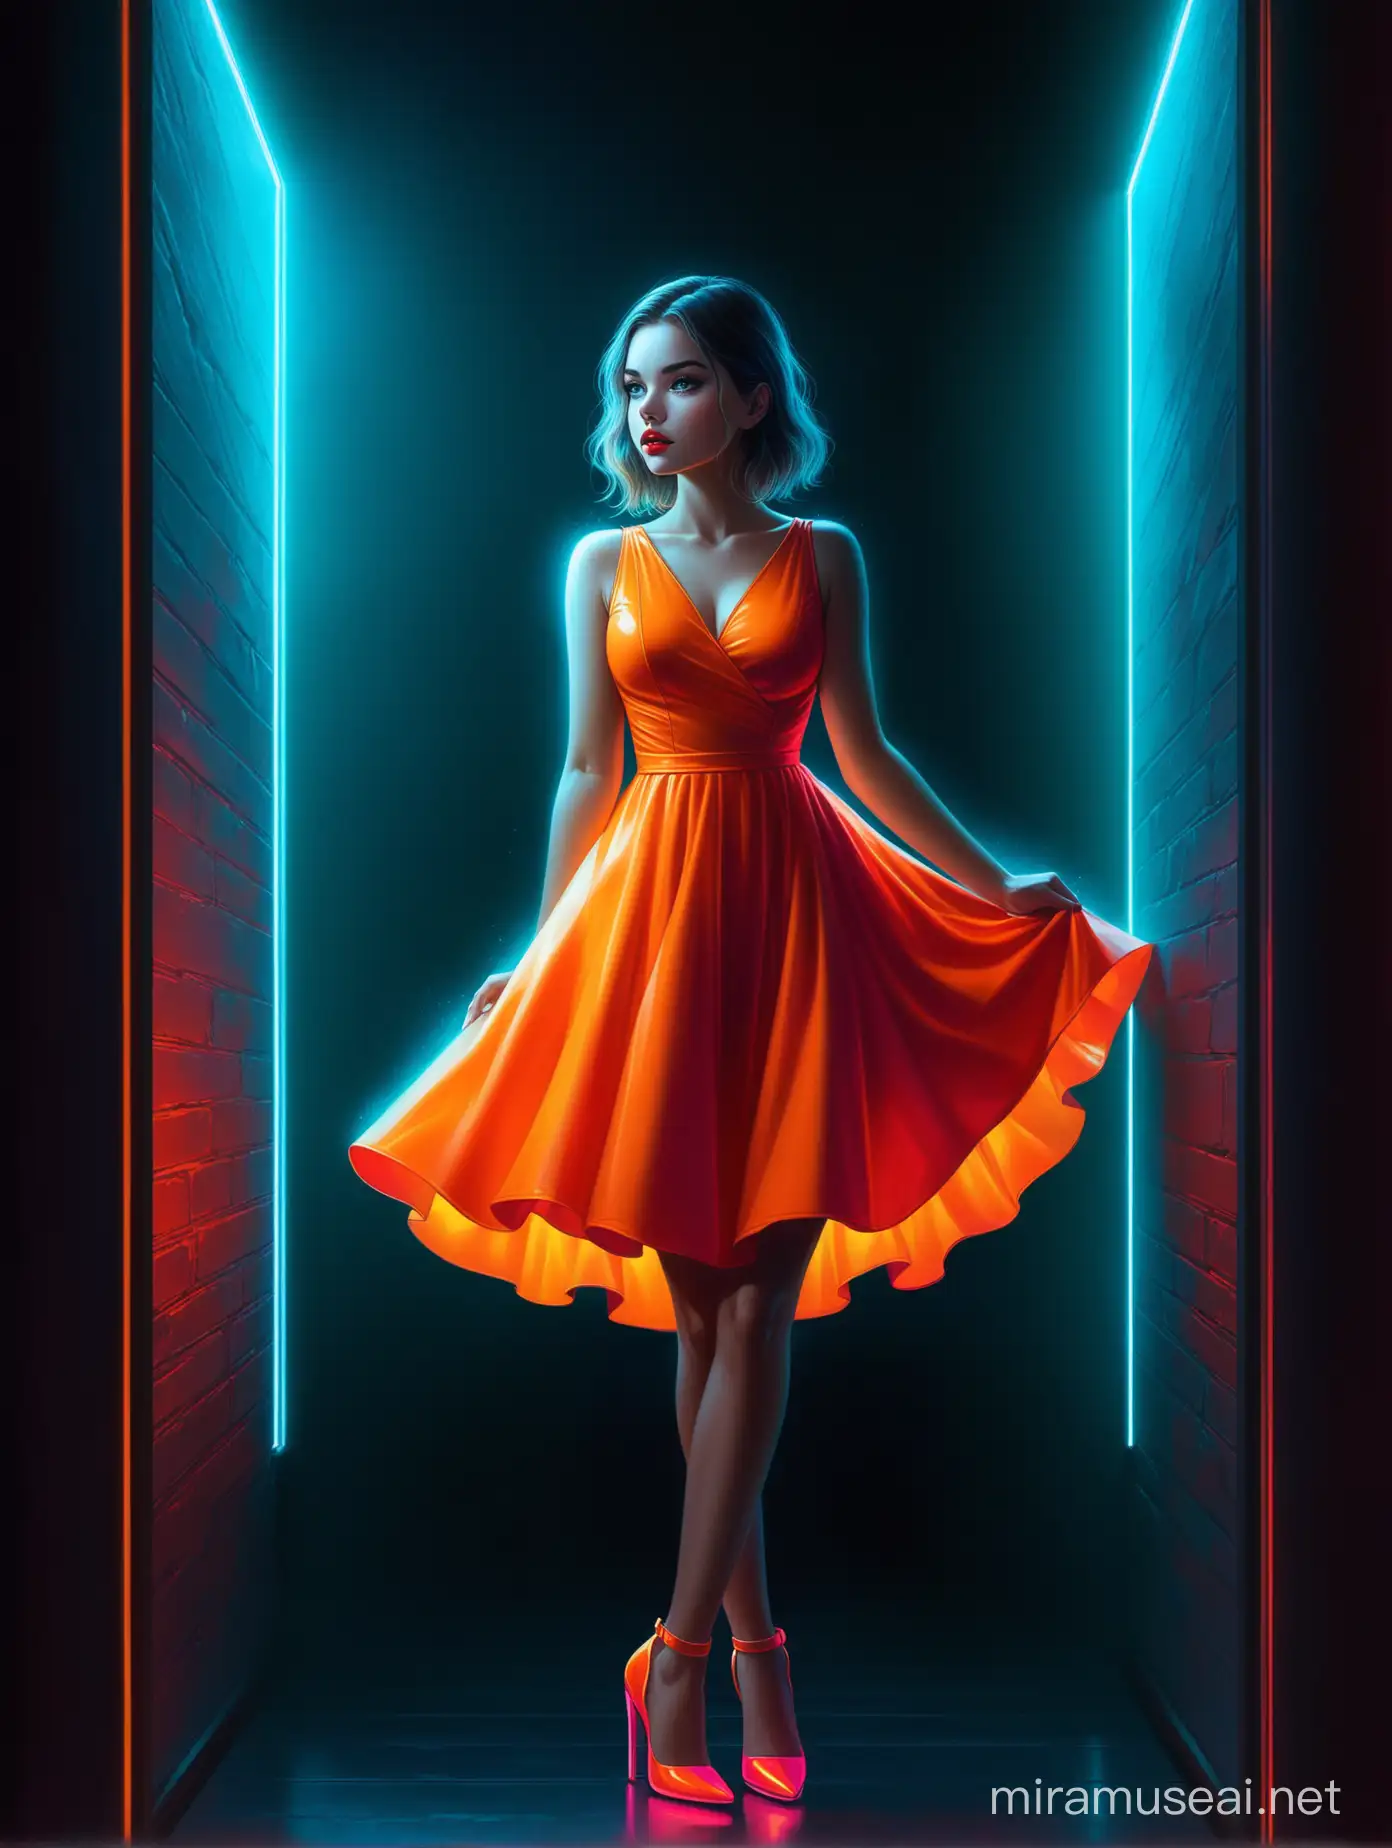 Beautiful Young Woman in Stunning Orange Dress Looking Anxiously Out the Window in Neonlit Environment